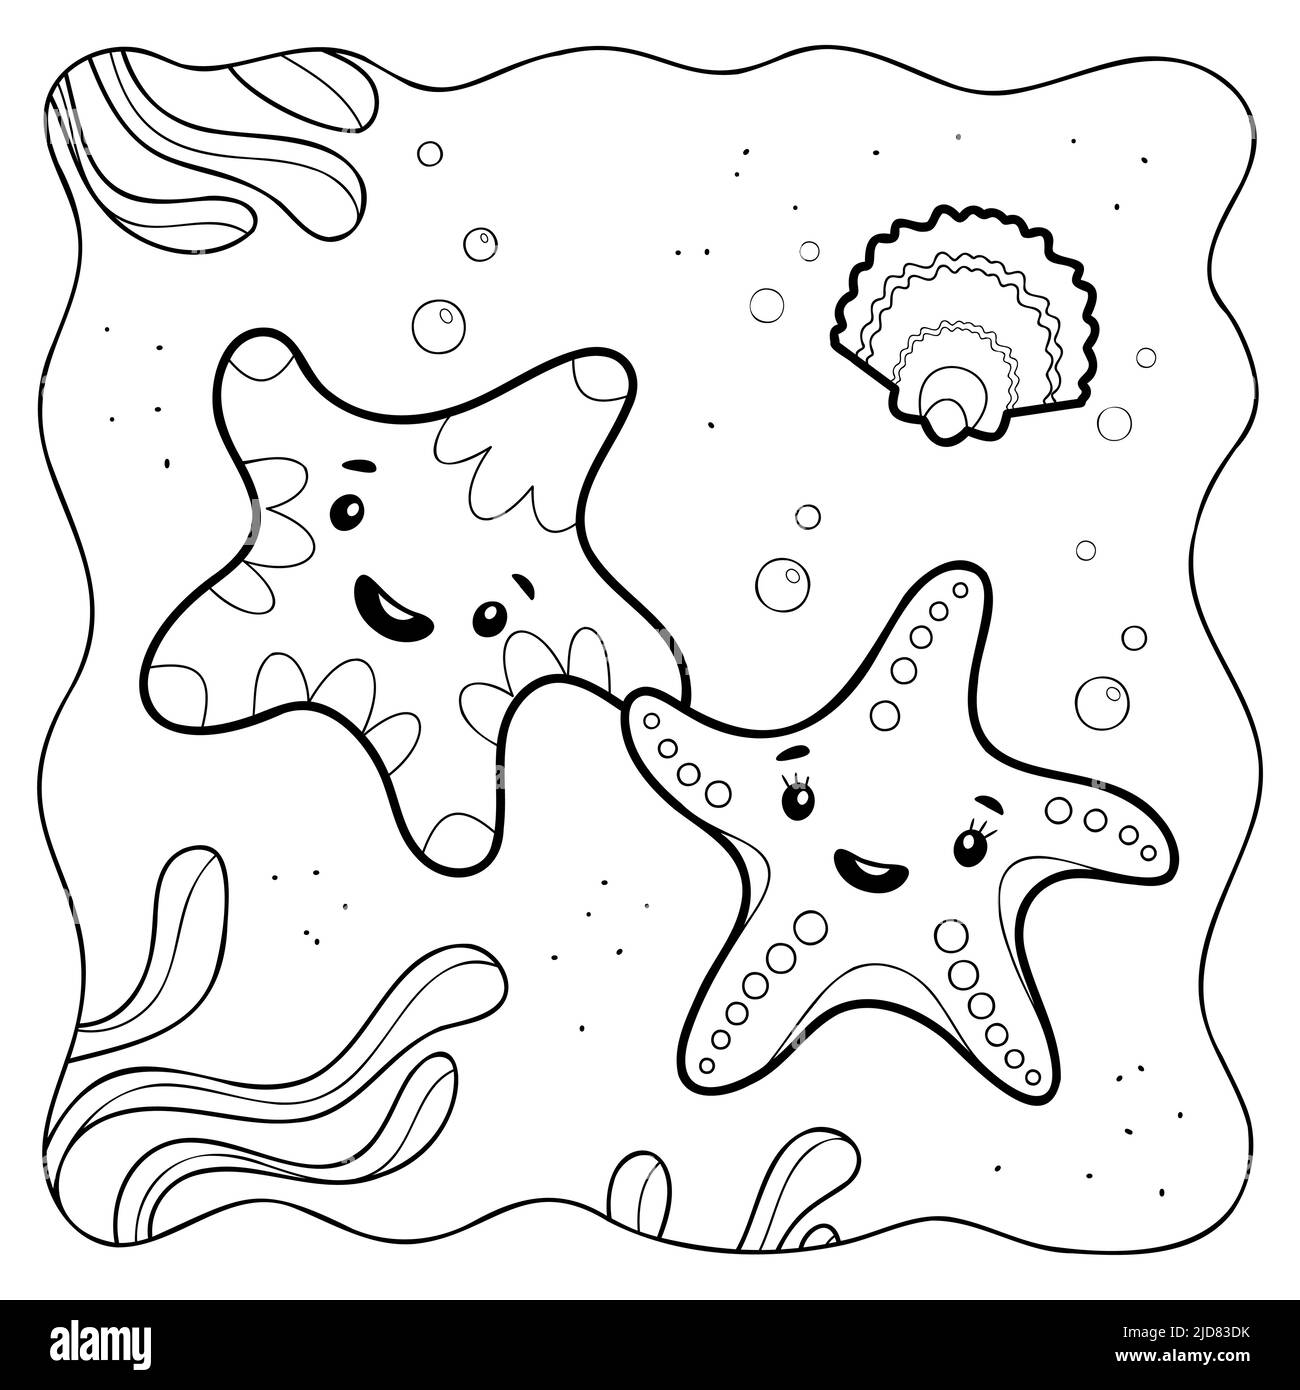 Ocean coloring pages black and white stock photos images